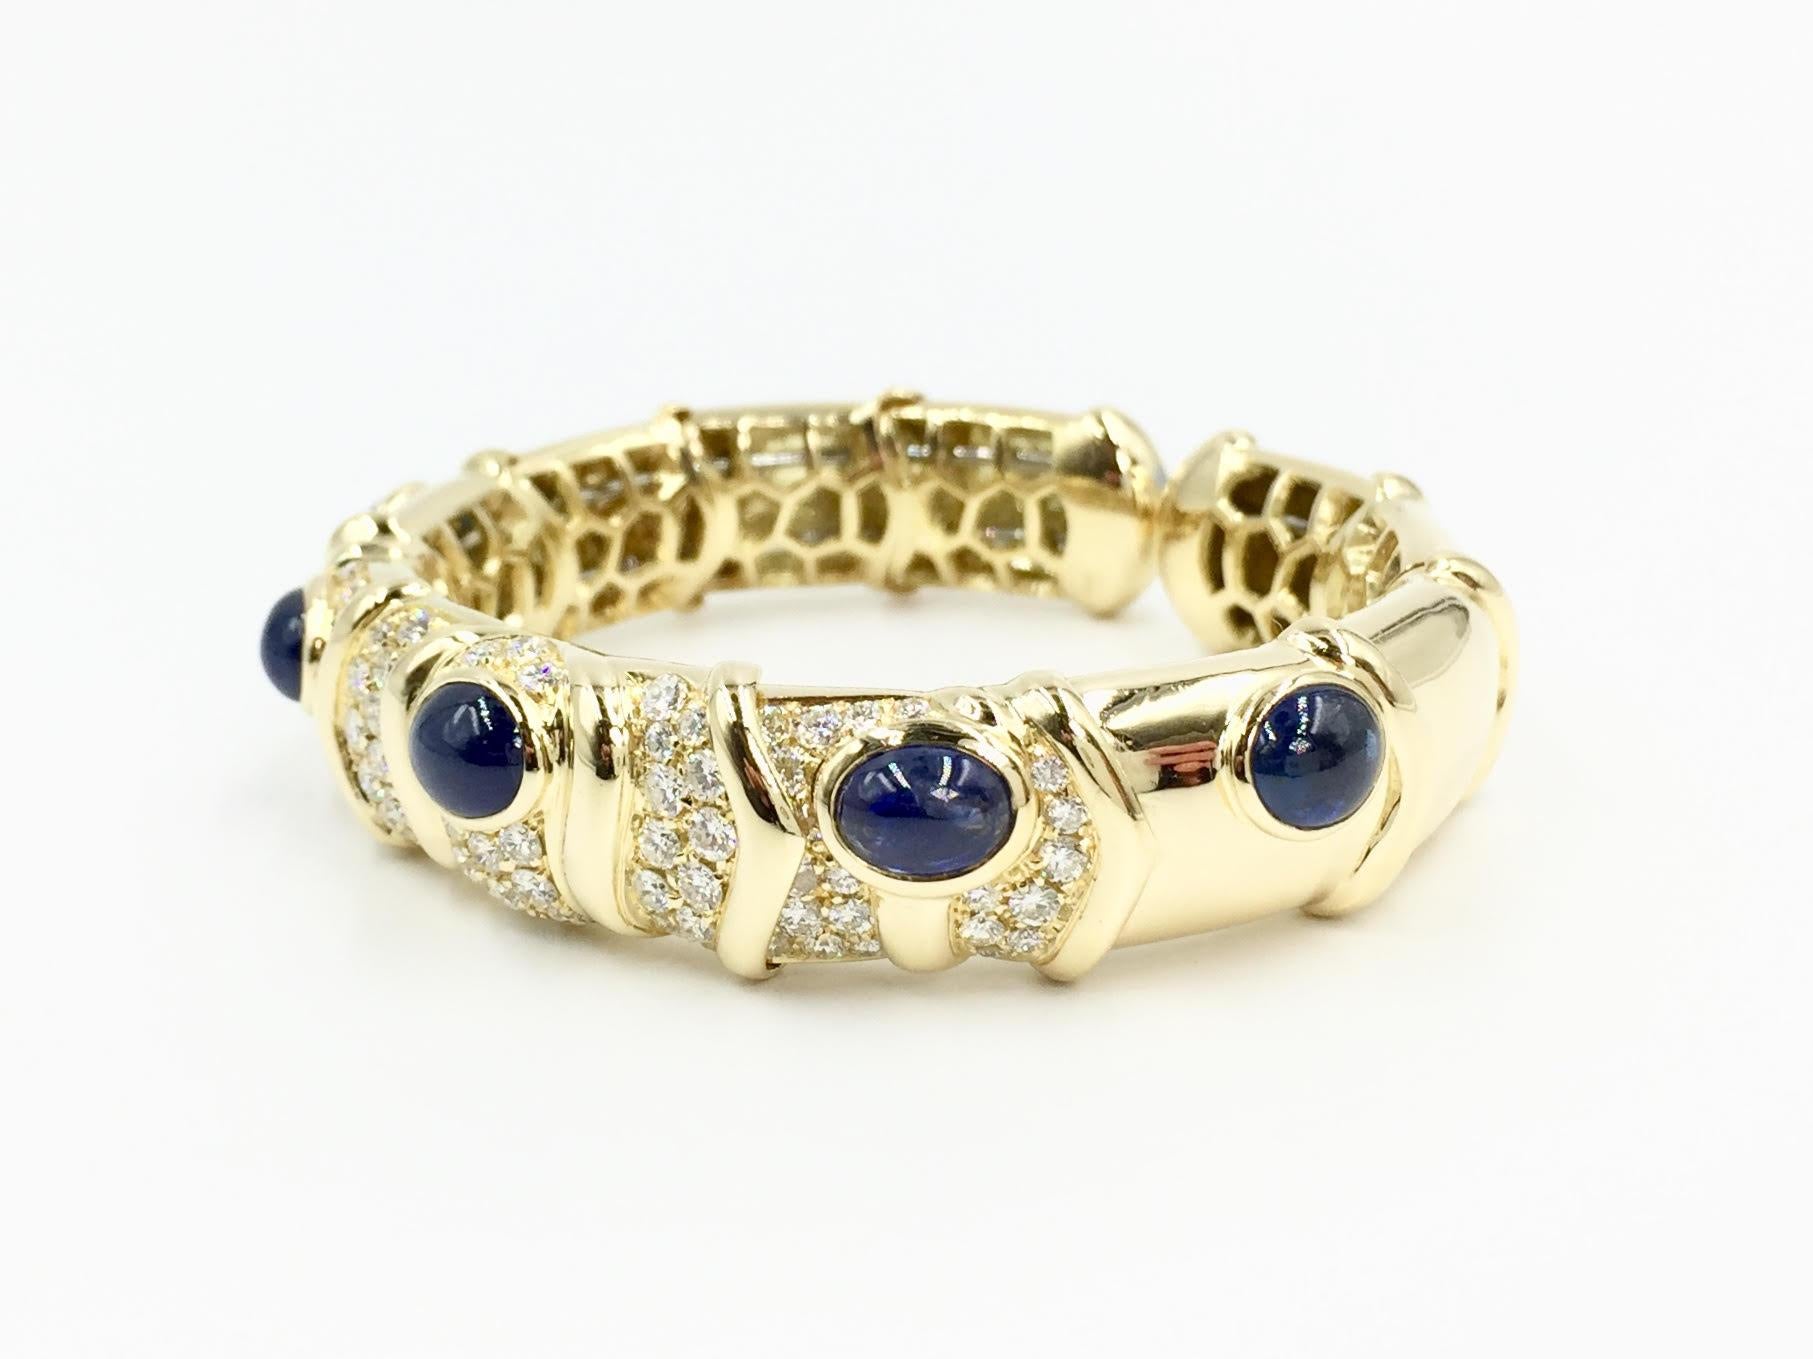 Polished 18 karat yellow gold oval cuff bracelet with five gorgeous oval cabochon blue sapphires and high quality pavé set diamonds by fine jewelry designer Giovane. Blue sapphires have a well saturated medium blue hue and a total weight of 9.14